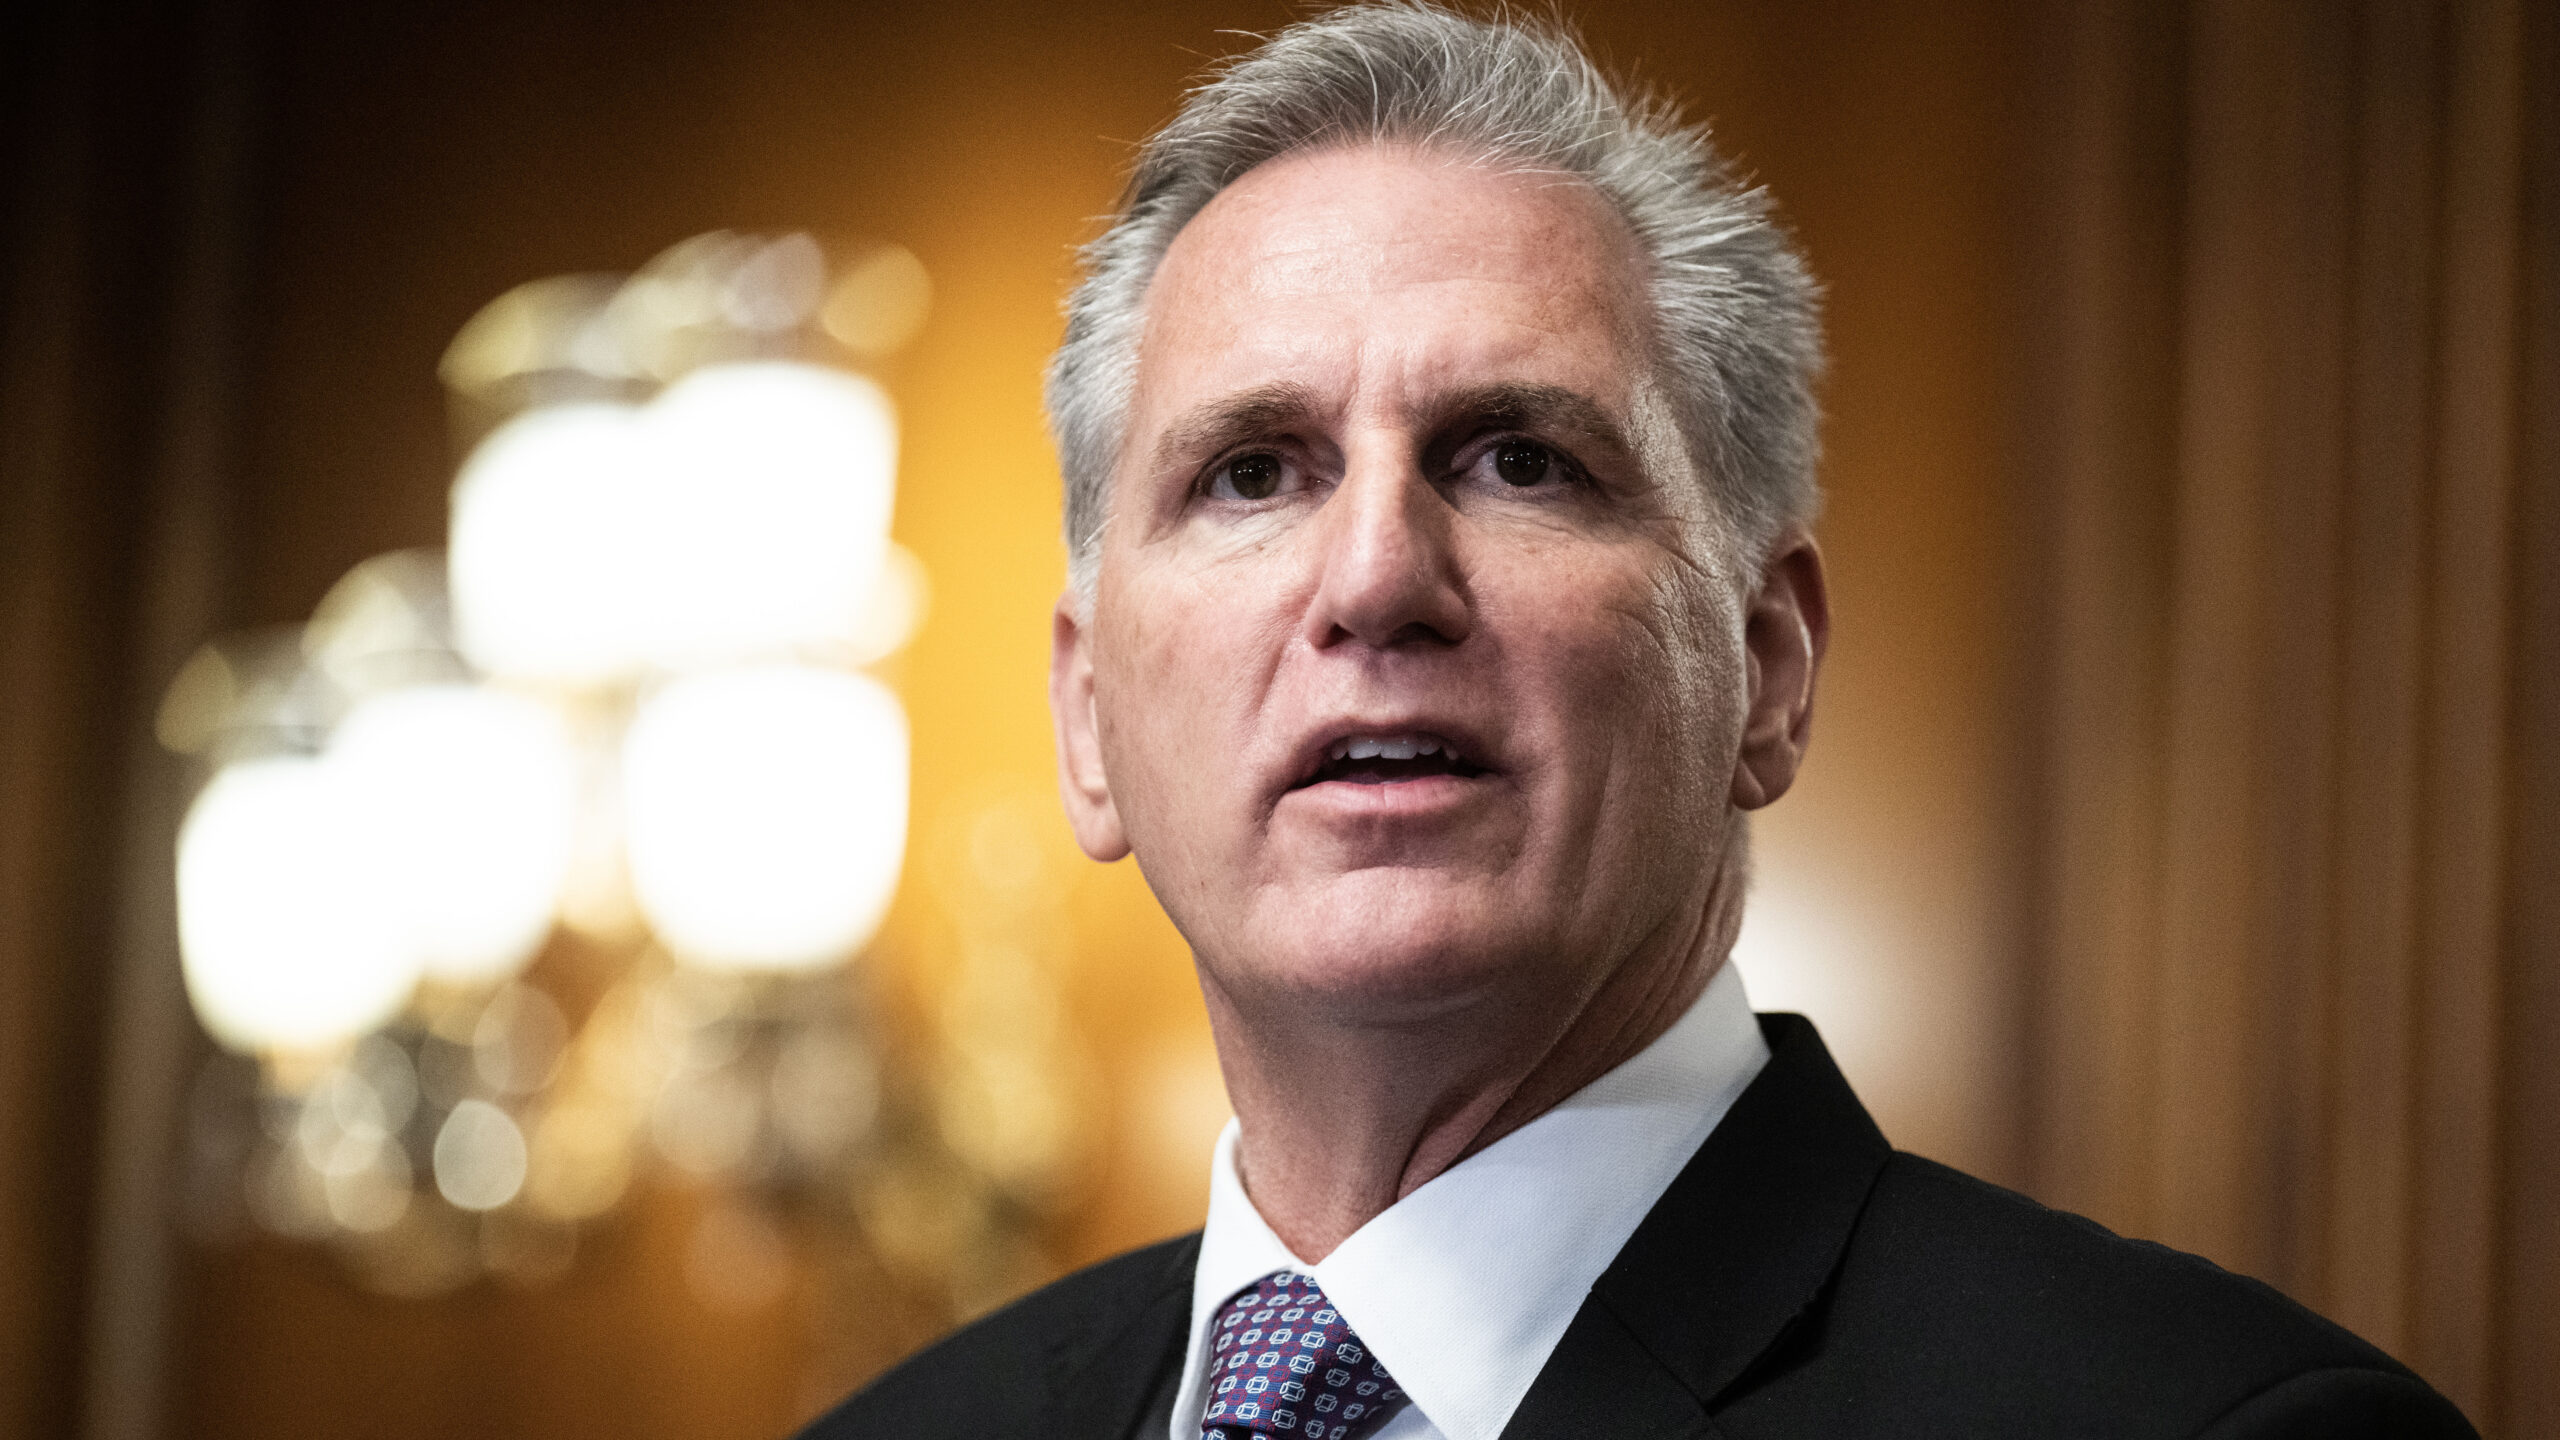 Kevin McCarthy Criticizes CNN for Biased Reporting in Fiery Interview